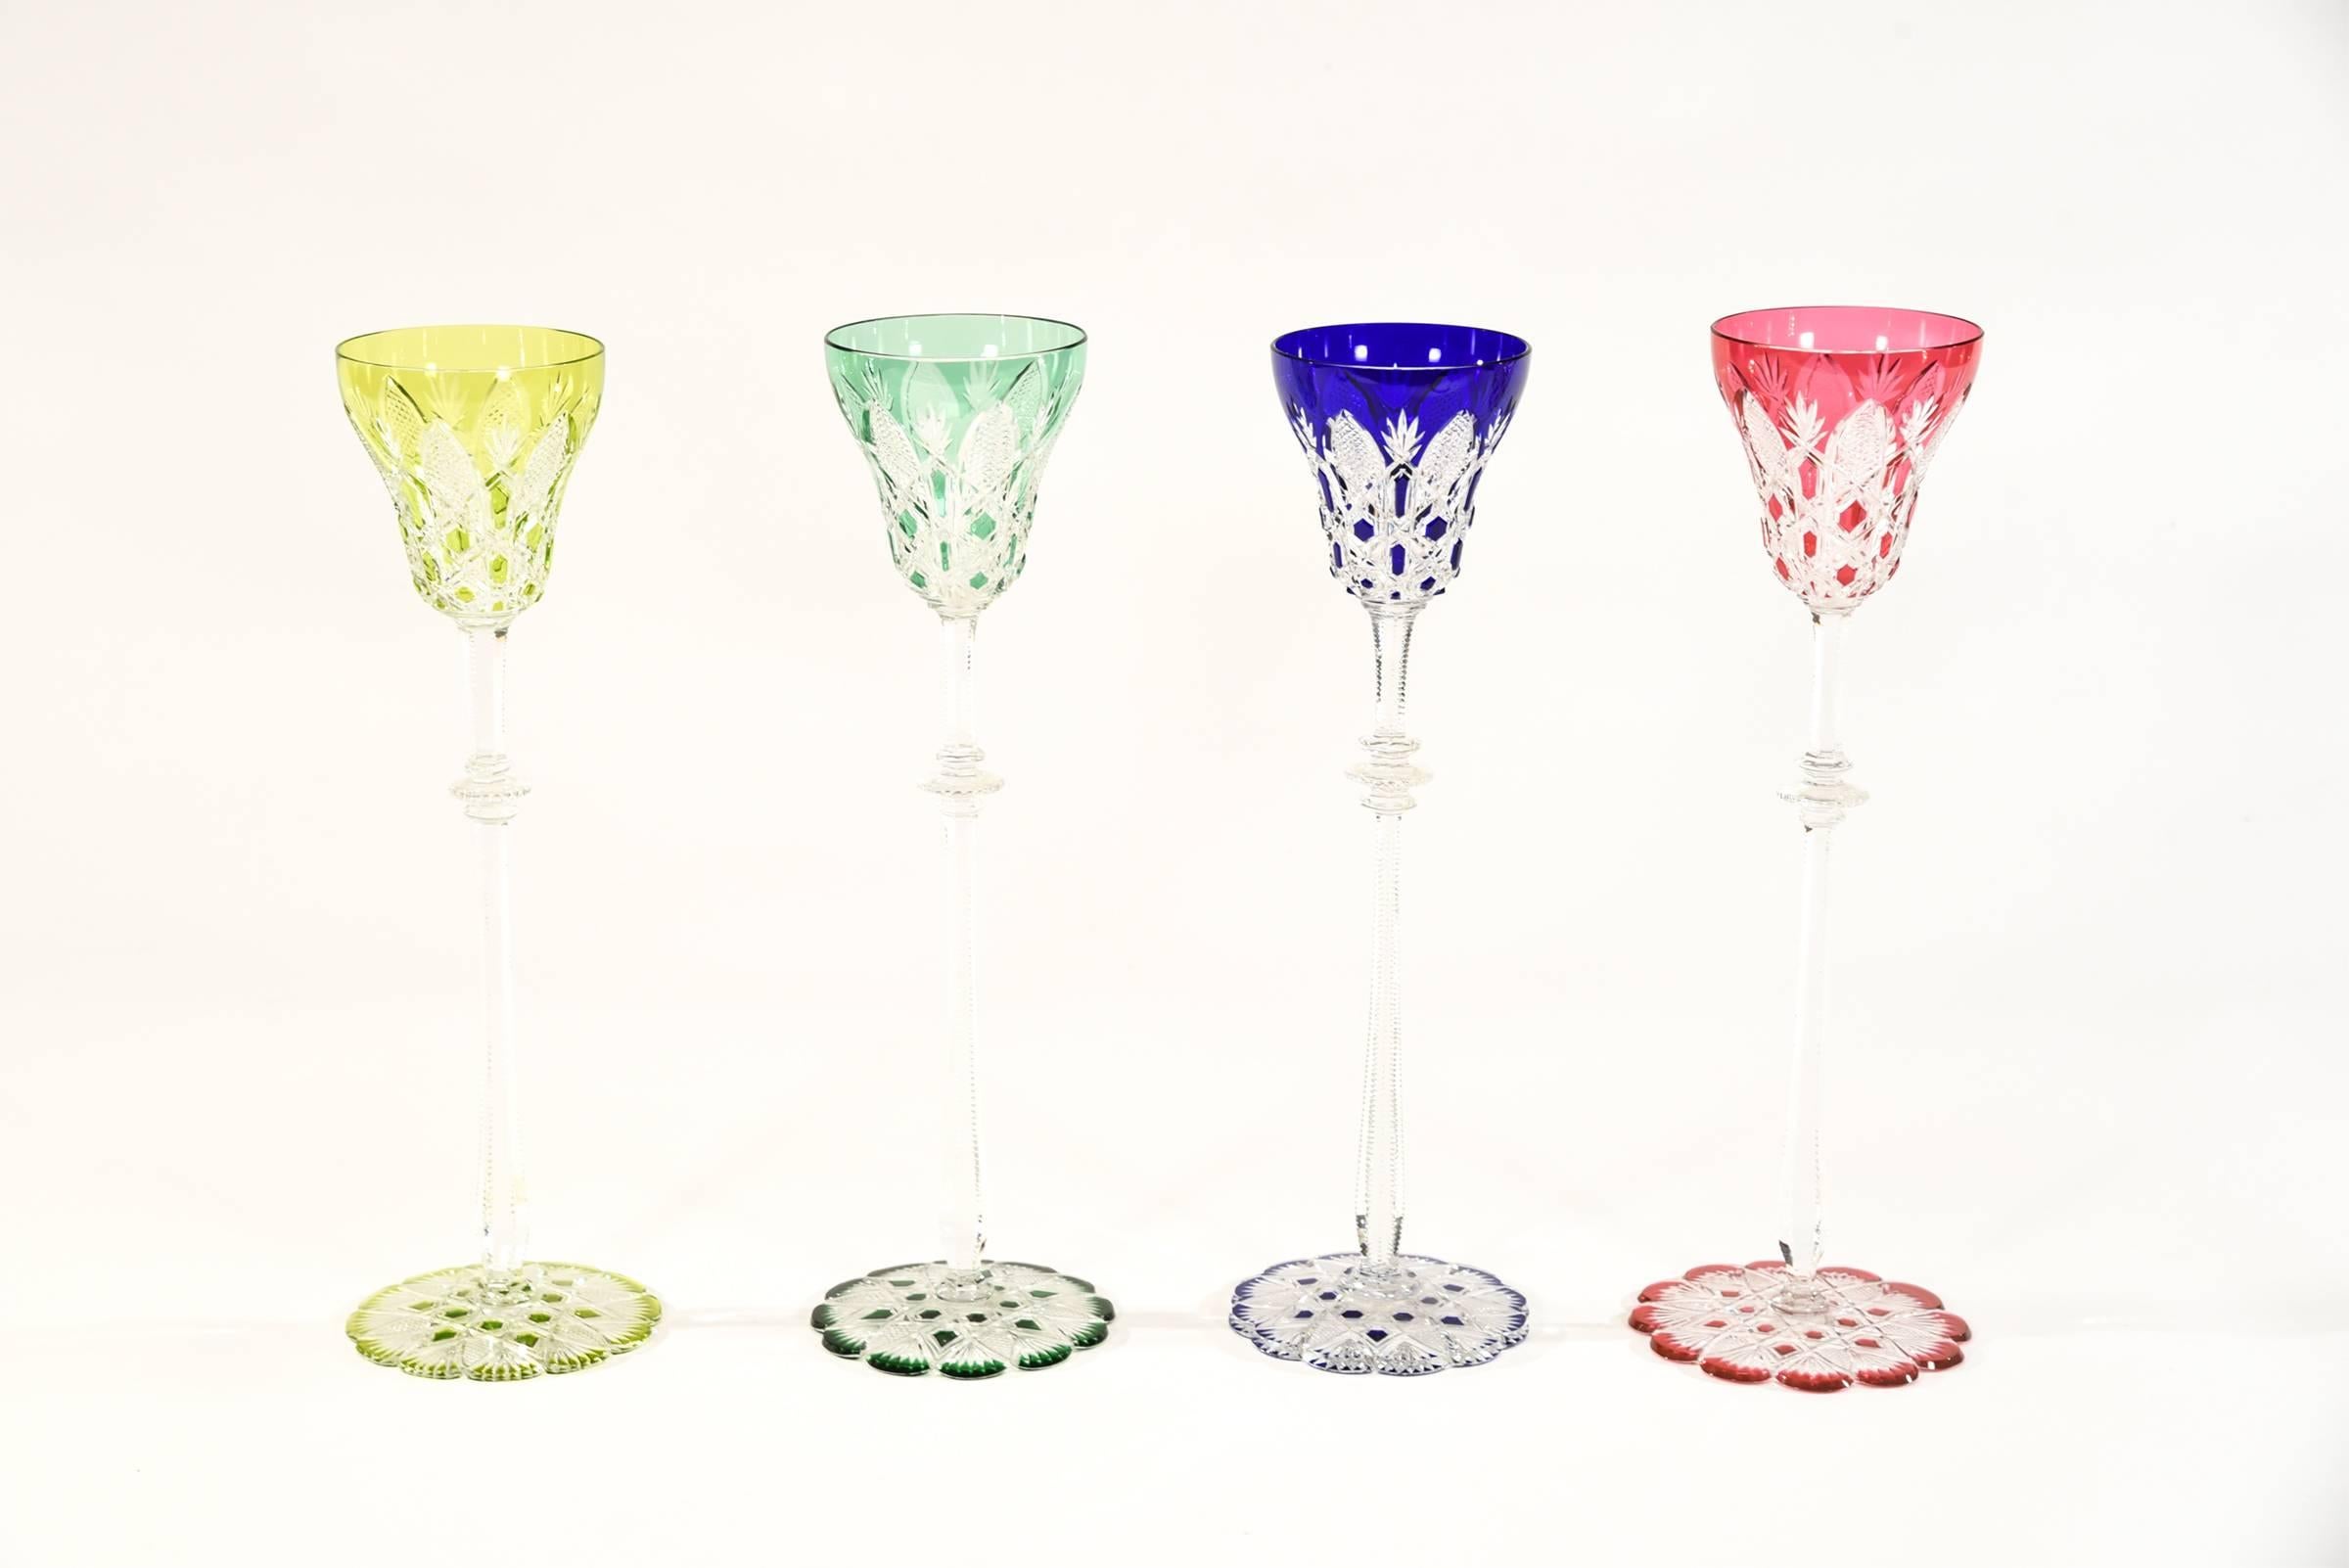 An amazing and rare collection of 12 Baccarat goblets cut to clear in the intricate and complex 